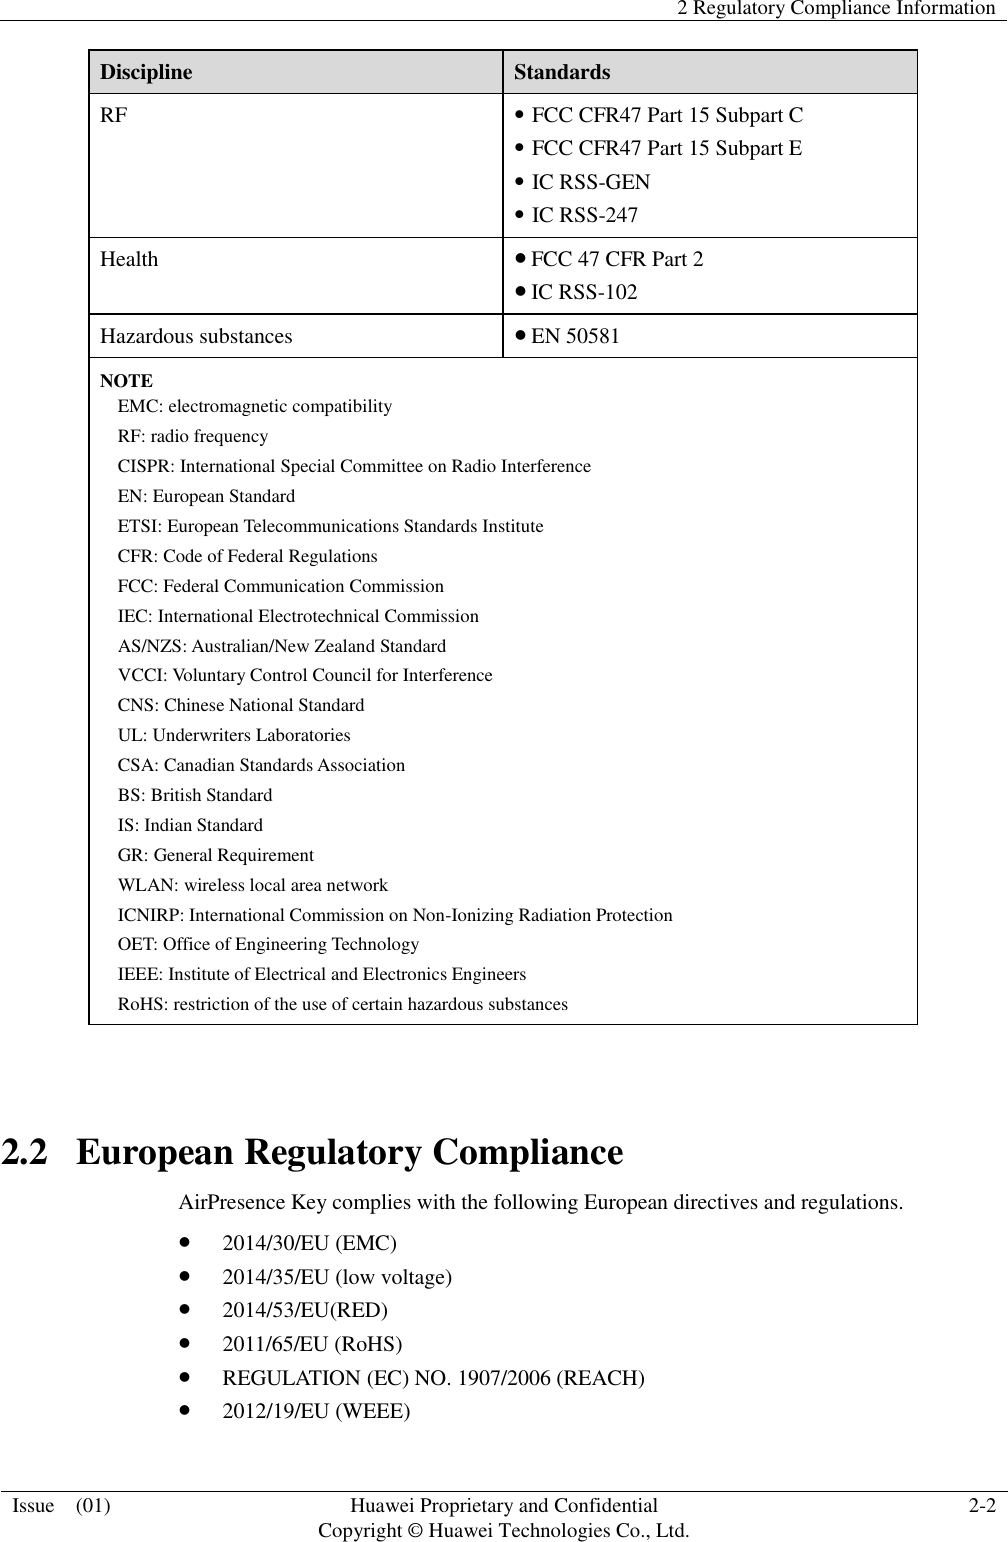   2 Regulatory Compliance Information  Issue    (01) Huawei Proprietary and Confidential                                     Copyright © Huawei Technologies Co., Ltd. 2-2  Discipline Standards RF  FCC CFR47 Part 15 Subpart C  FCC CFR47 Part 15 Subpart E  IC RSS-GEN  IC RSS-247 Health  FCC 47 CFR Part 2  IC RSS-102 Hazardous substances  EN 50581 NOTE EMC: electromagnetic compatibility RF: radio frequency CISPR: International Special Committee on Radio Interference EN: European Standard ETSI: European Telecommunications Standards Institute CFR: Code of Federal Regulations FCC: Federal Communication Commission IEC: International Electrotechnical Commission AS/NZS: Australian/New Zealand Standard VCCI: Voluntary Control Council for Interference CNS: Chinese National Standard UL: Underwriters Laboratories CSA: Canadian Standards Association BS: British Standard IS: Indian Standard GR: General Requirement WLAN: wireless local area network ICNIRP: International Commission on Non-Ionizing Radiation Protection OET: Office of Engineering Technology IEEE: Institute of Electrical and Electronics Engineers RoHS: restriction of the use of certain hazardous substances  2.2   European Regulatory Compliance AirPresence Key complies with the following European directives and regulations.  2014/30/EU (EMC)  2014/35/EU (low voltage)  2014/53/EU(RED)  2011/65/EU (RoHS)  REGULATION (EC) NO. 1907/2006 (REACH)  2012/19/EU (WEEE) 